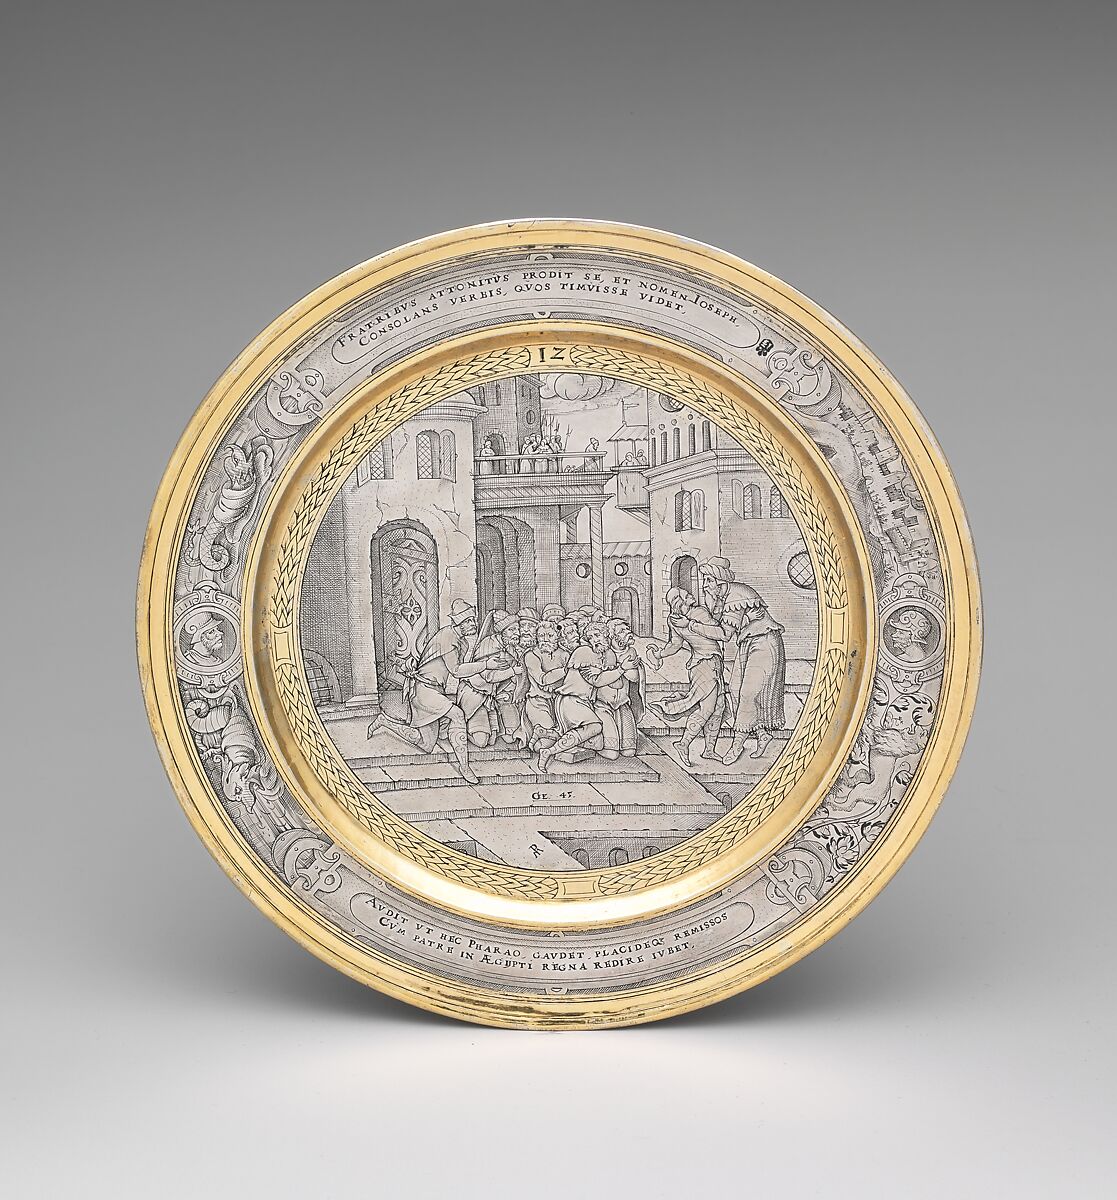 Joseph and his Brethren, Possibly engraved by P.M., Silver, partly gilded, probably British 